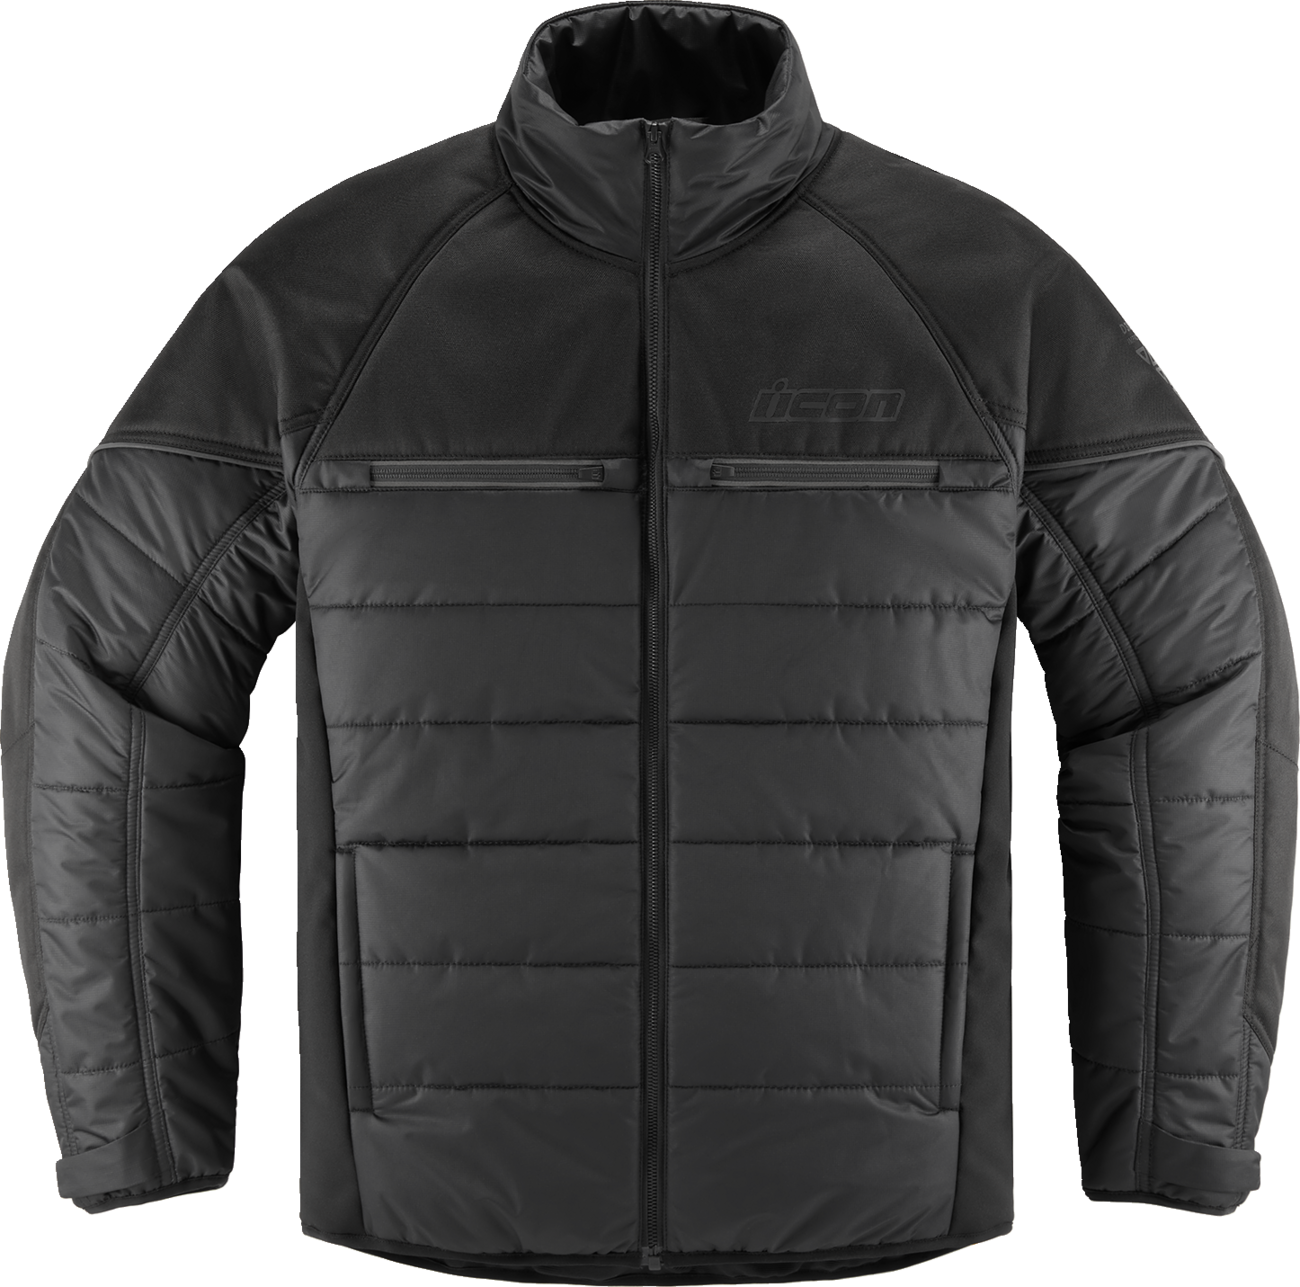 ICON Ghost Puffer Jacket - Black/Charcoal - Small 2820-6190